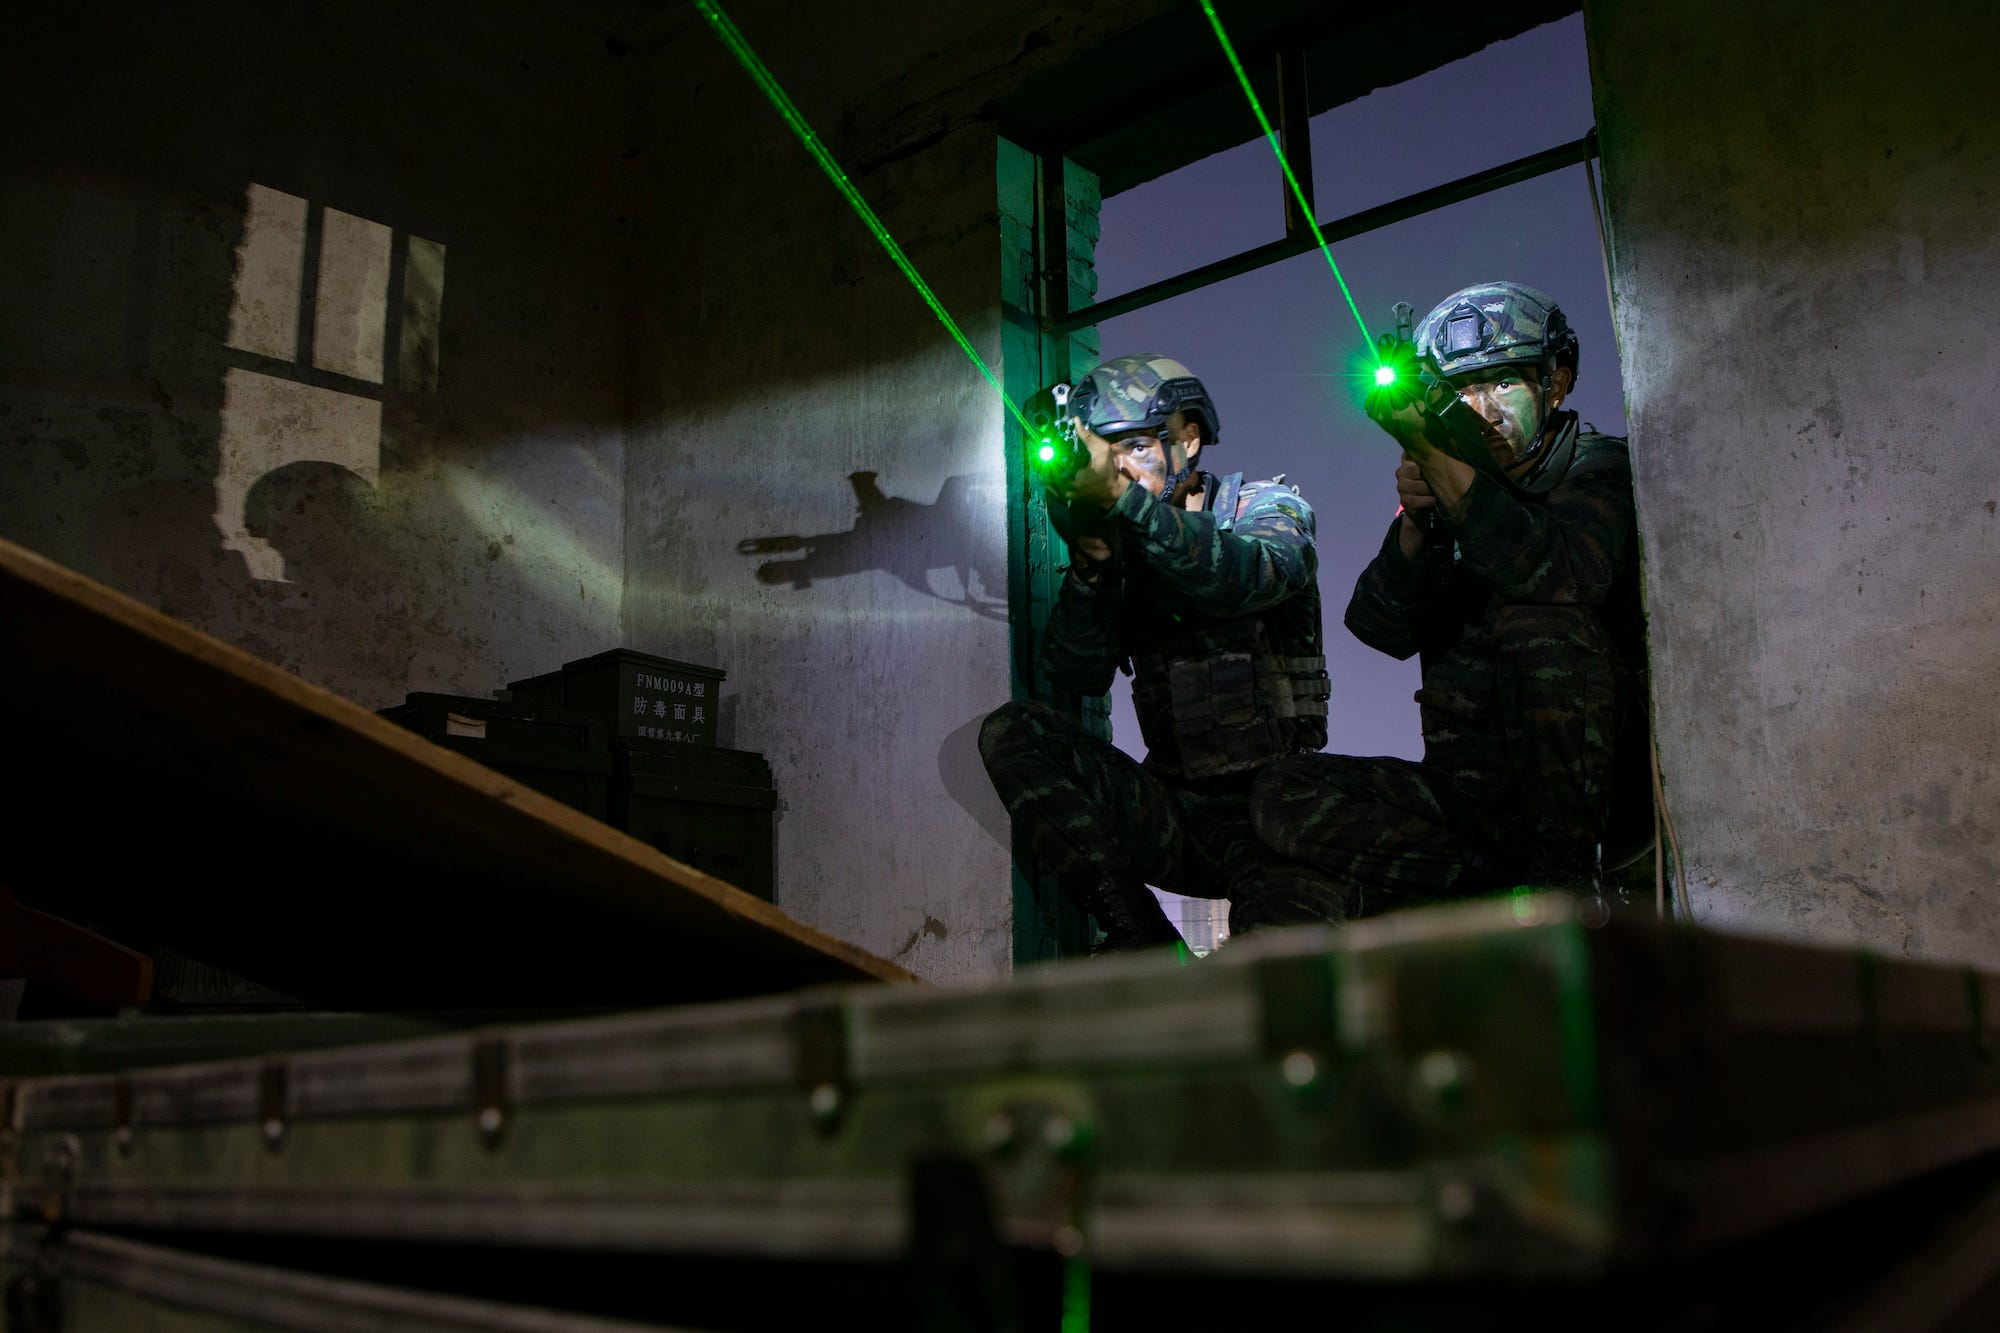 Chinese special-operations forces train with lasers